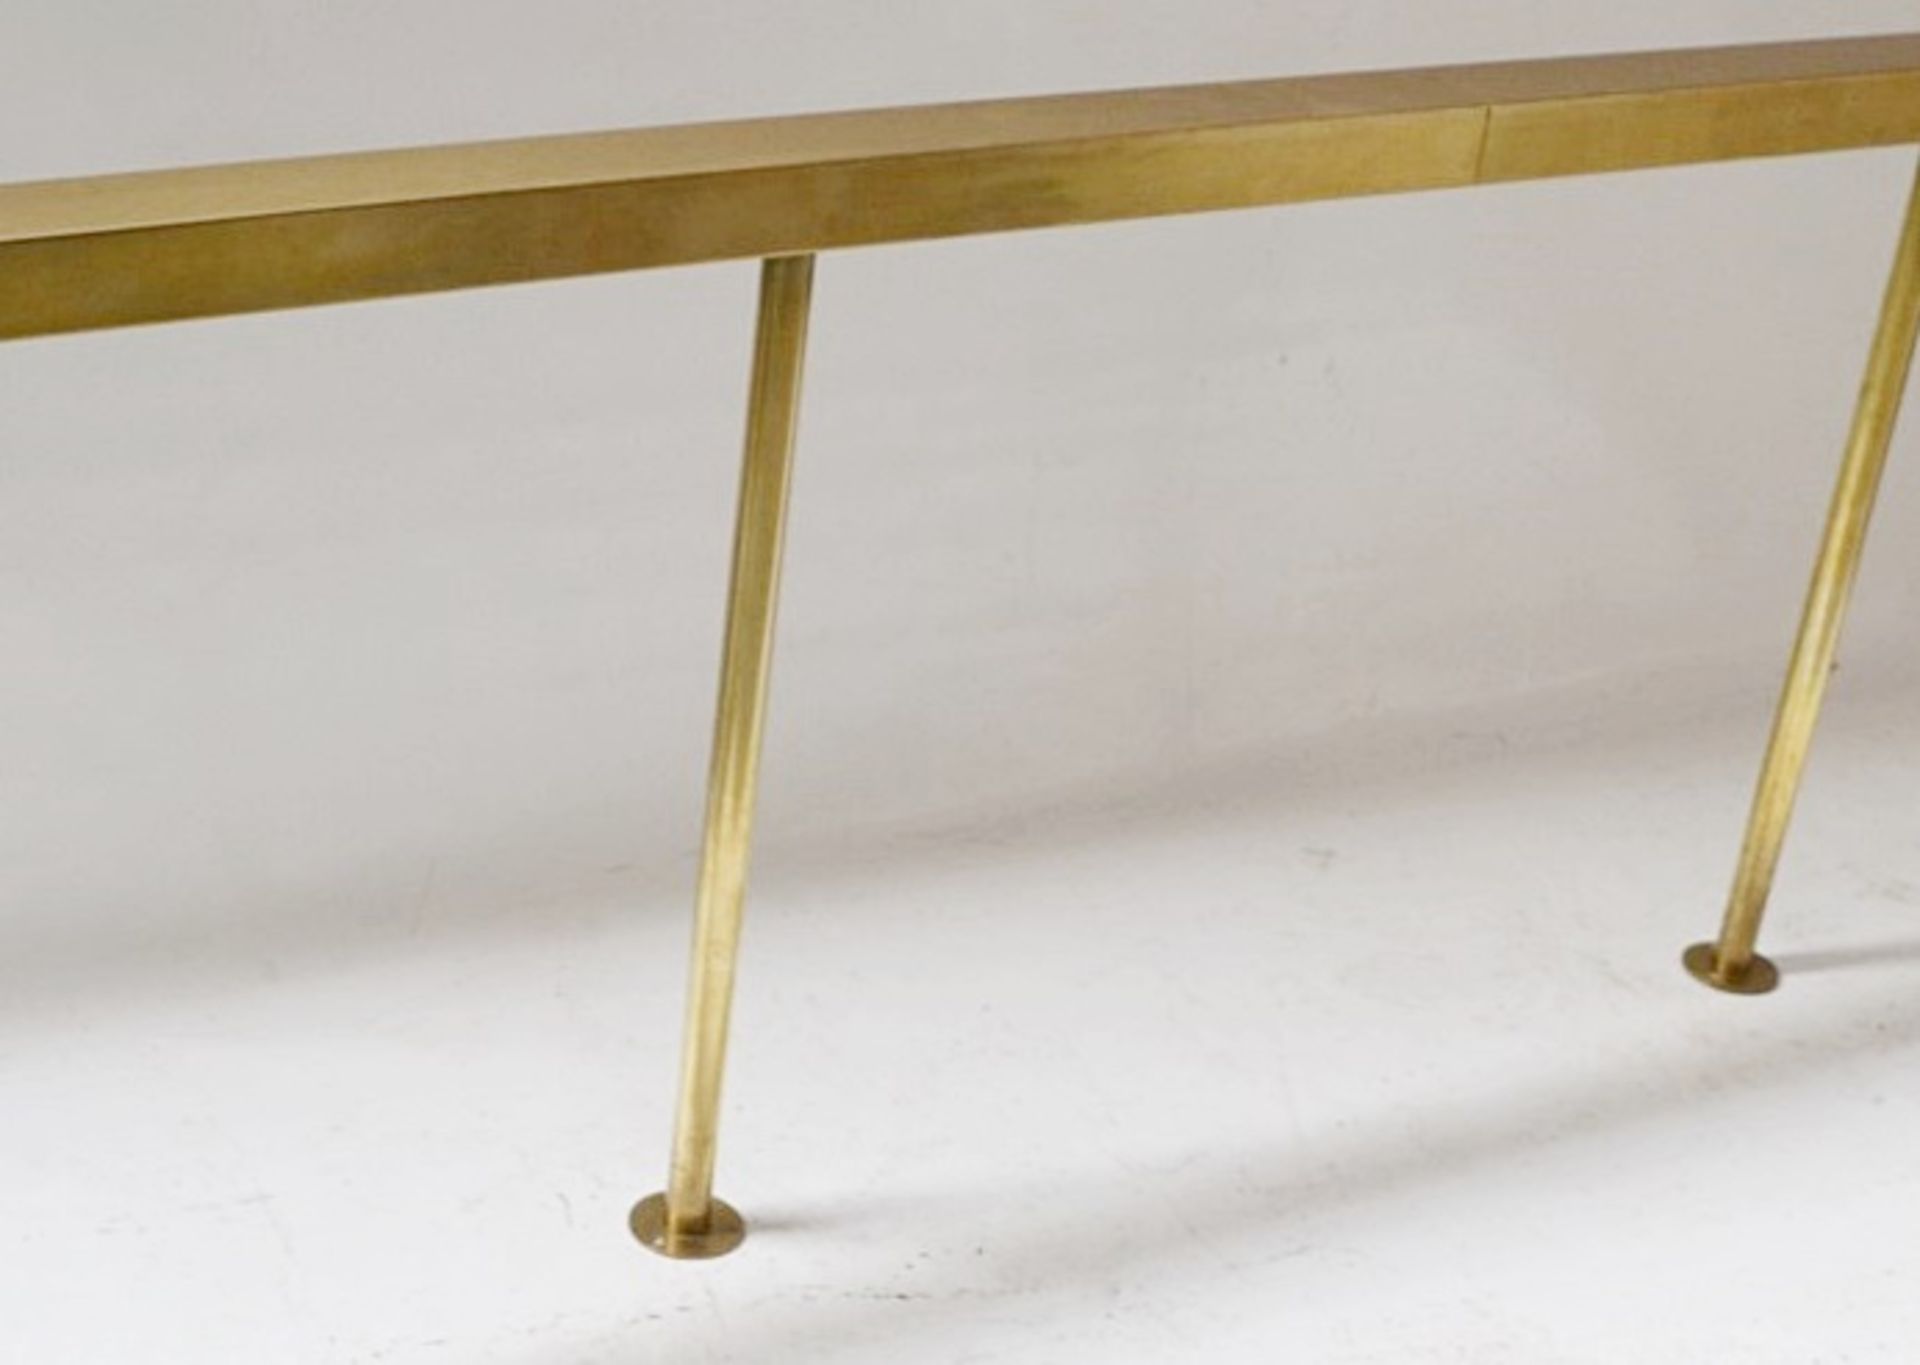 1 x Bespoke Table Mounted LED Restaurant Bar LIght In Brass With Acrylic Diffusers - 3 Metres Wide - Image 7 of 8